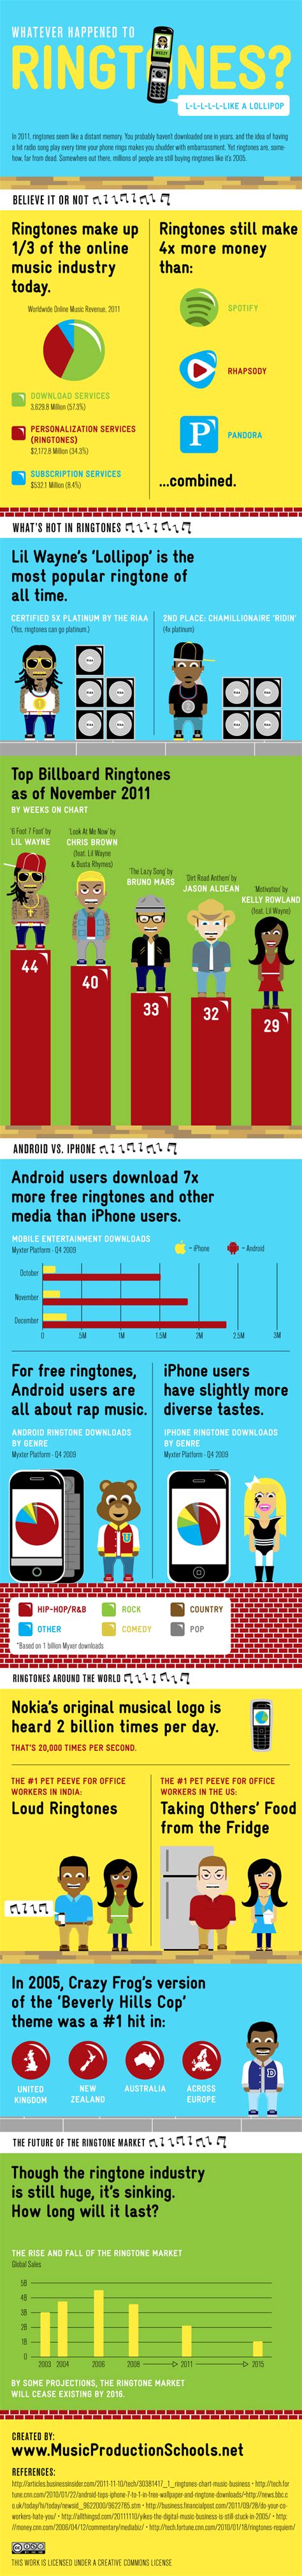 Whatever Happened To Ringtones? [INFOGRAPHIC] | Infographic, Social media infographic, Learn facts